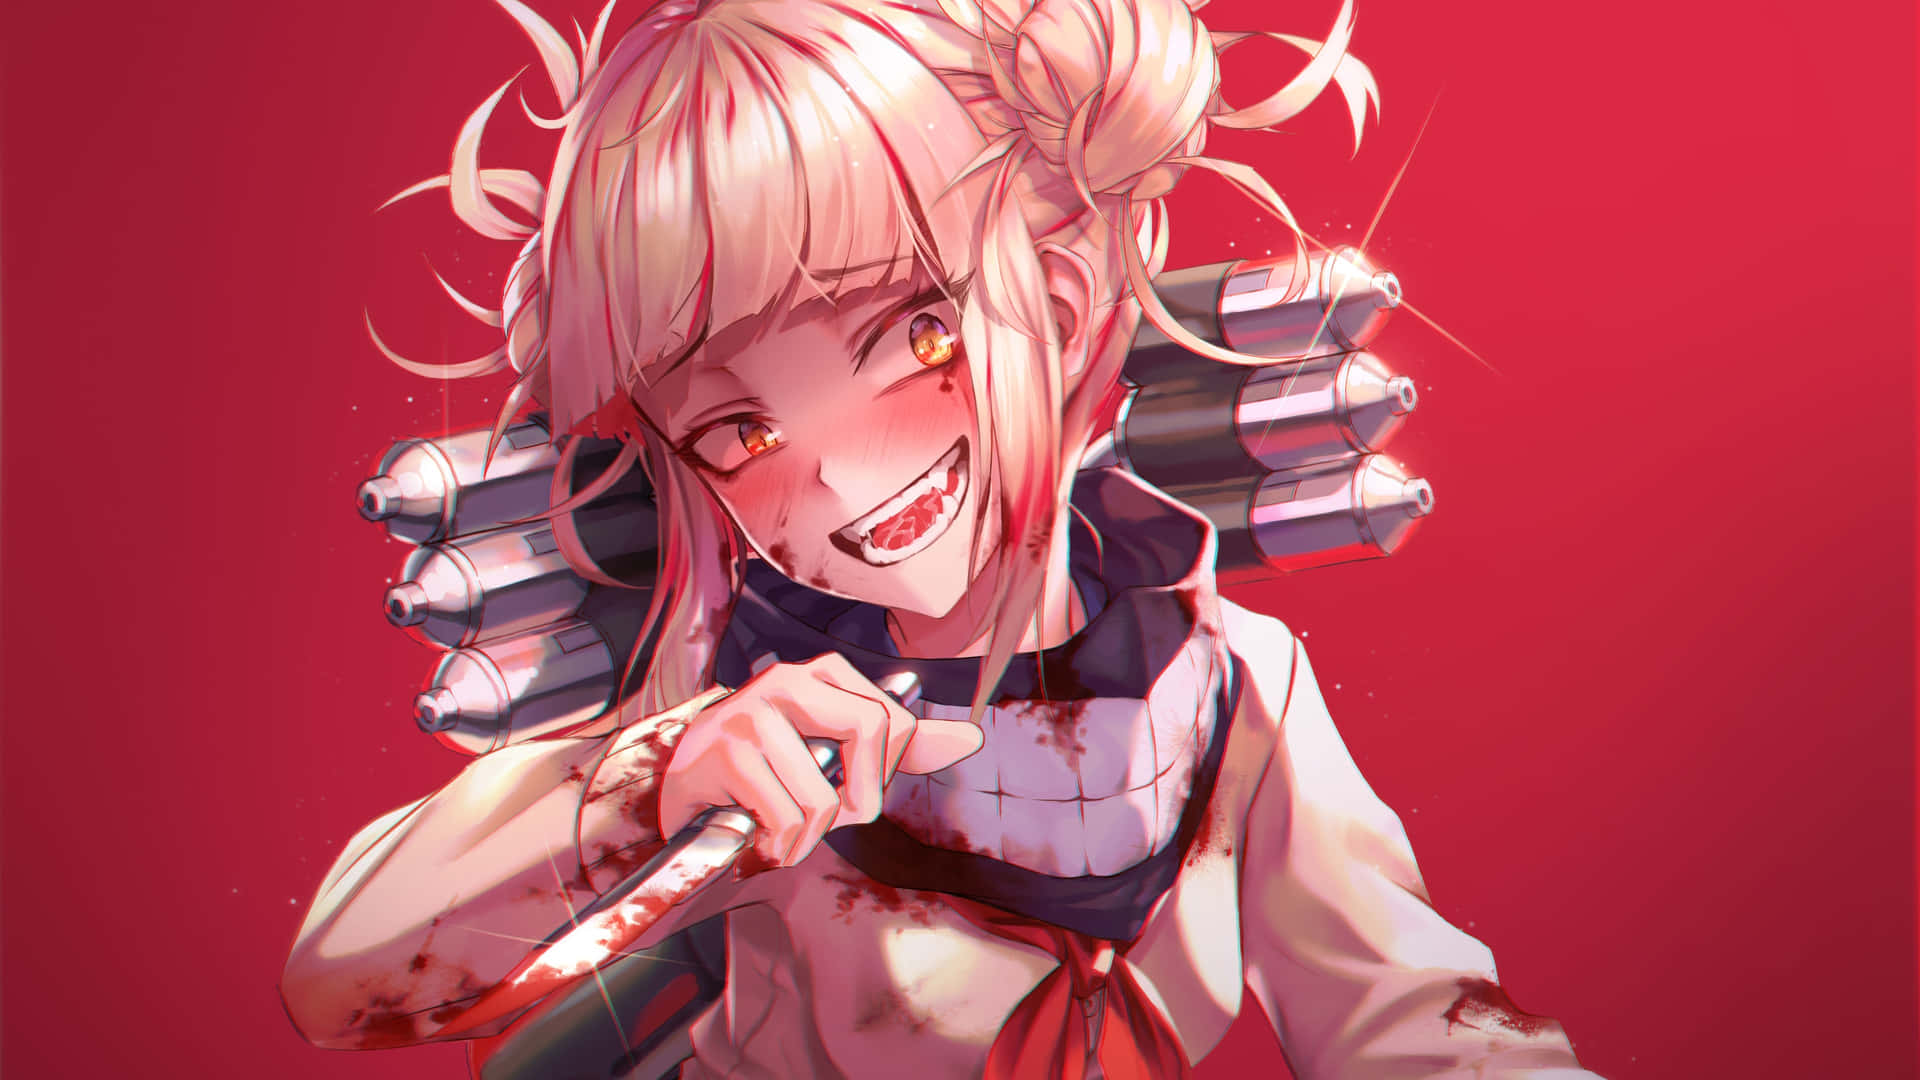 Caption: "toga Himiko - The Deceptively Cheerful Villainess From My Hero Academia" Wallpaper